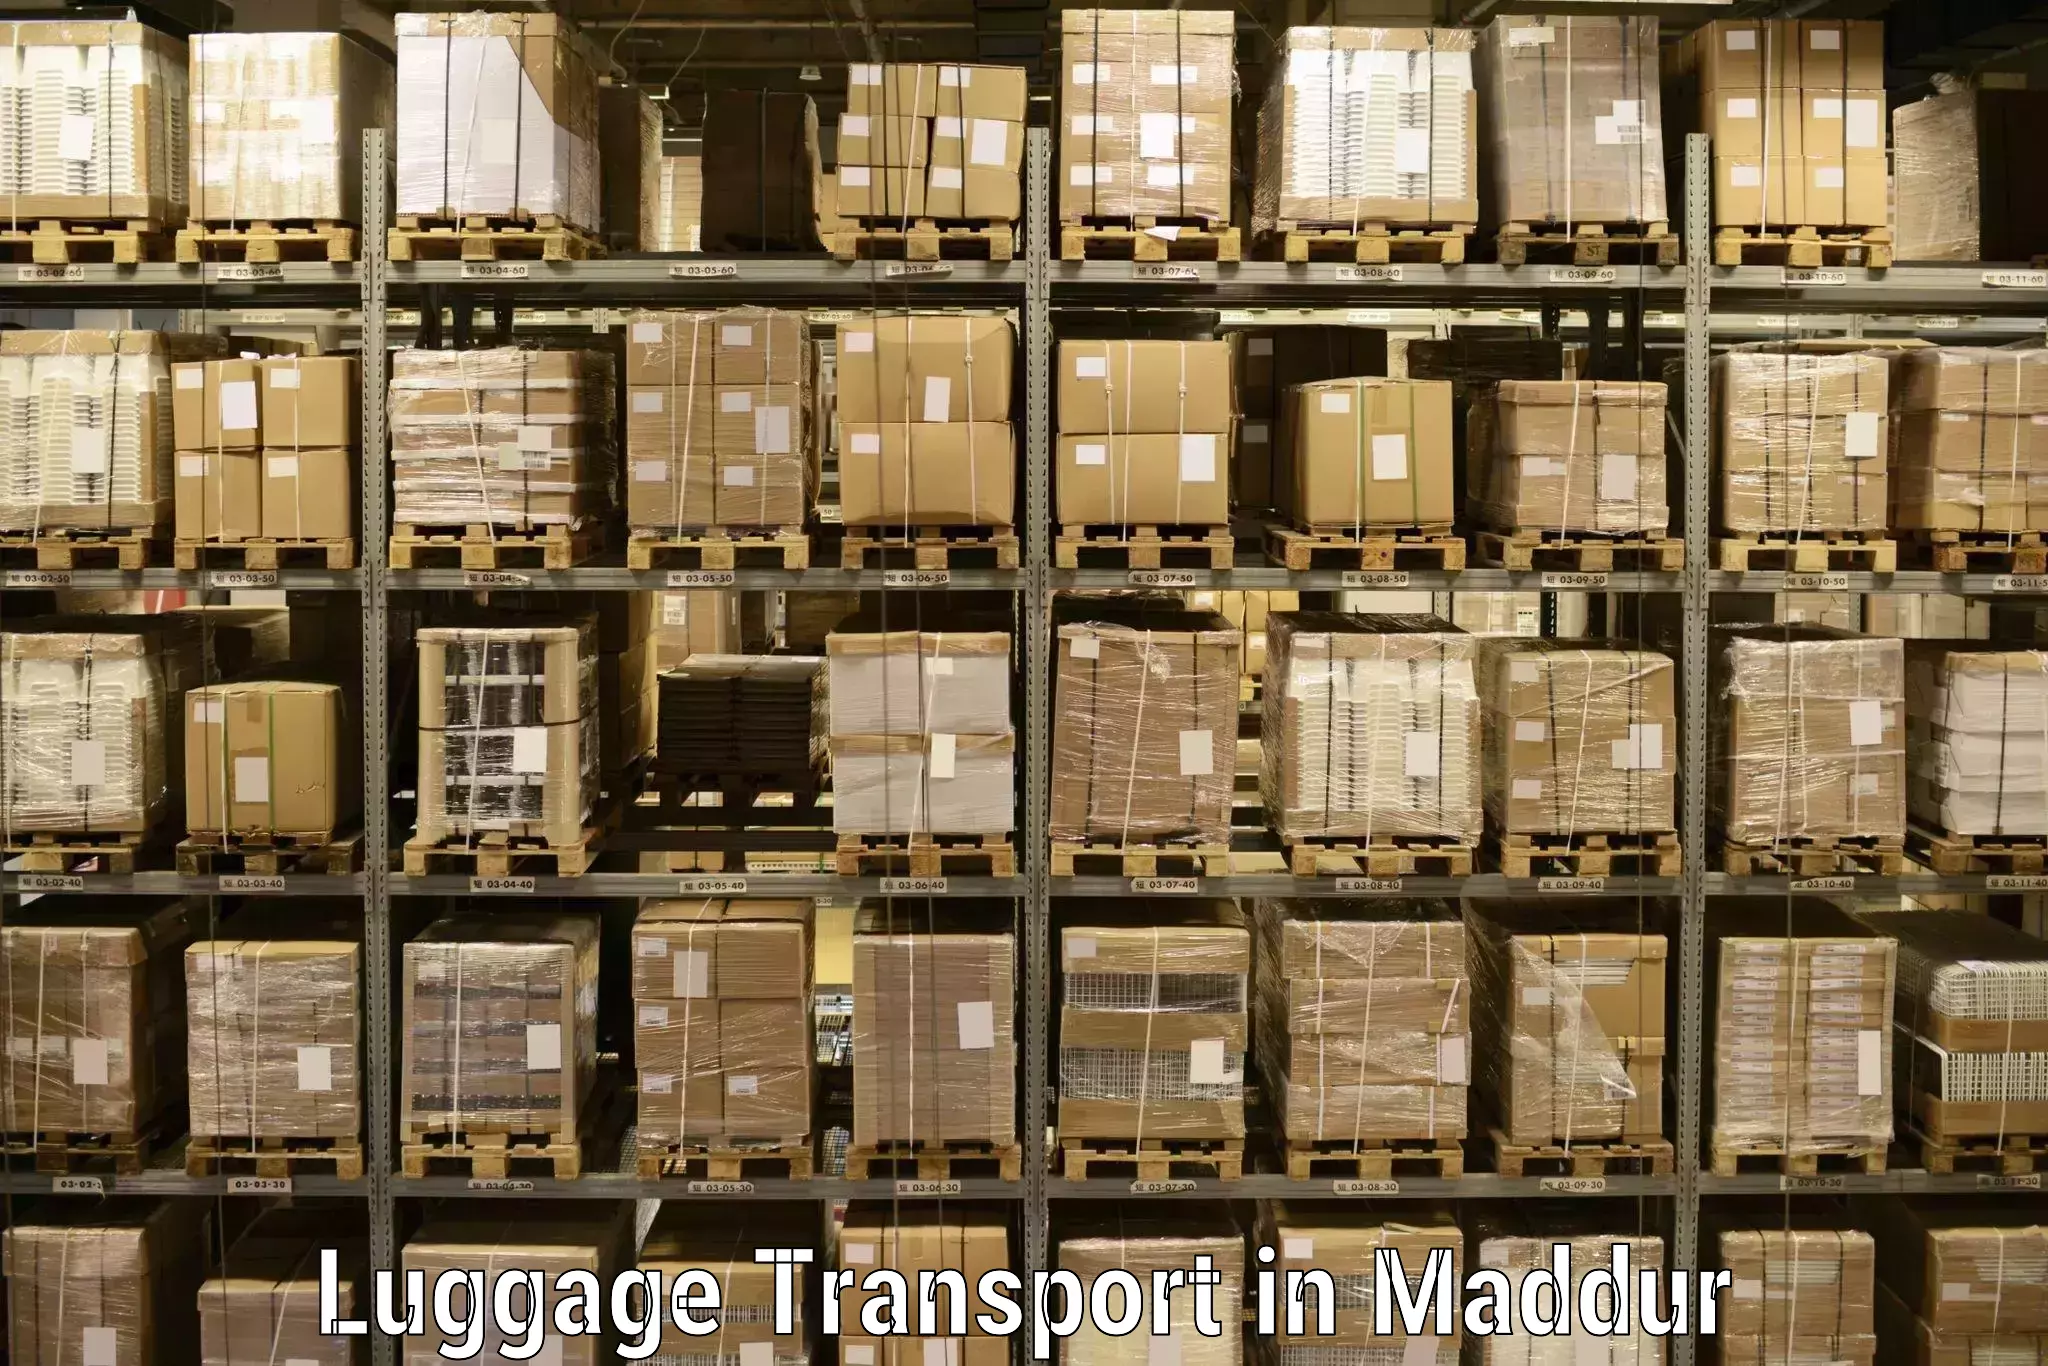 Luggage shipment specialists in Maddur